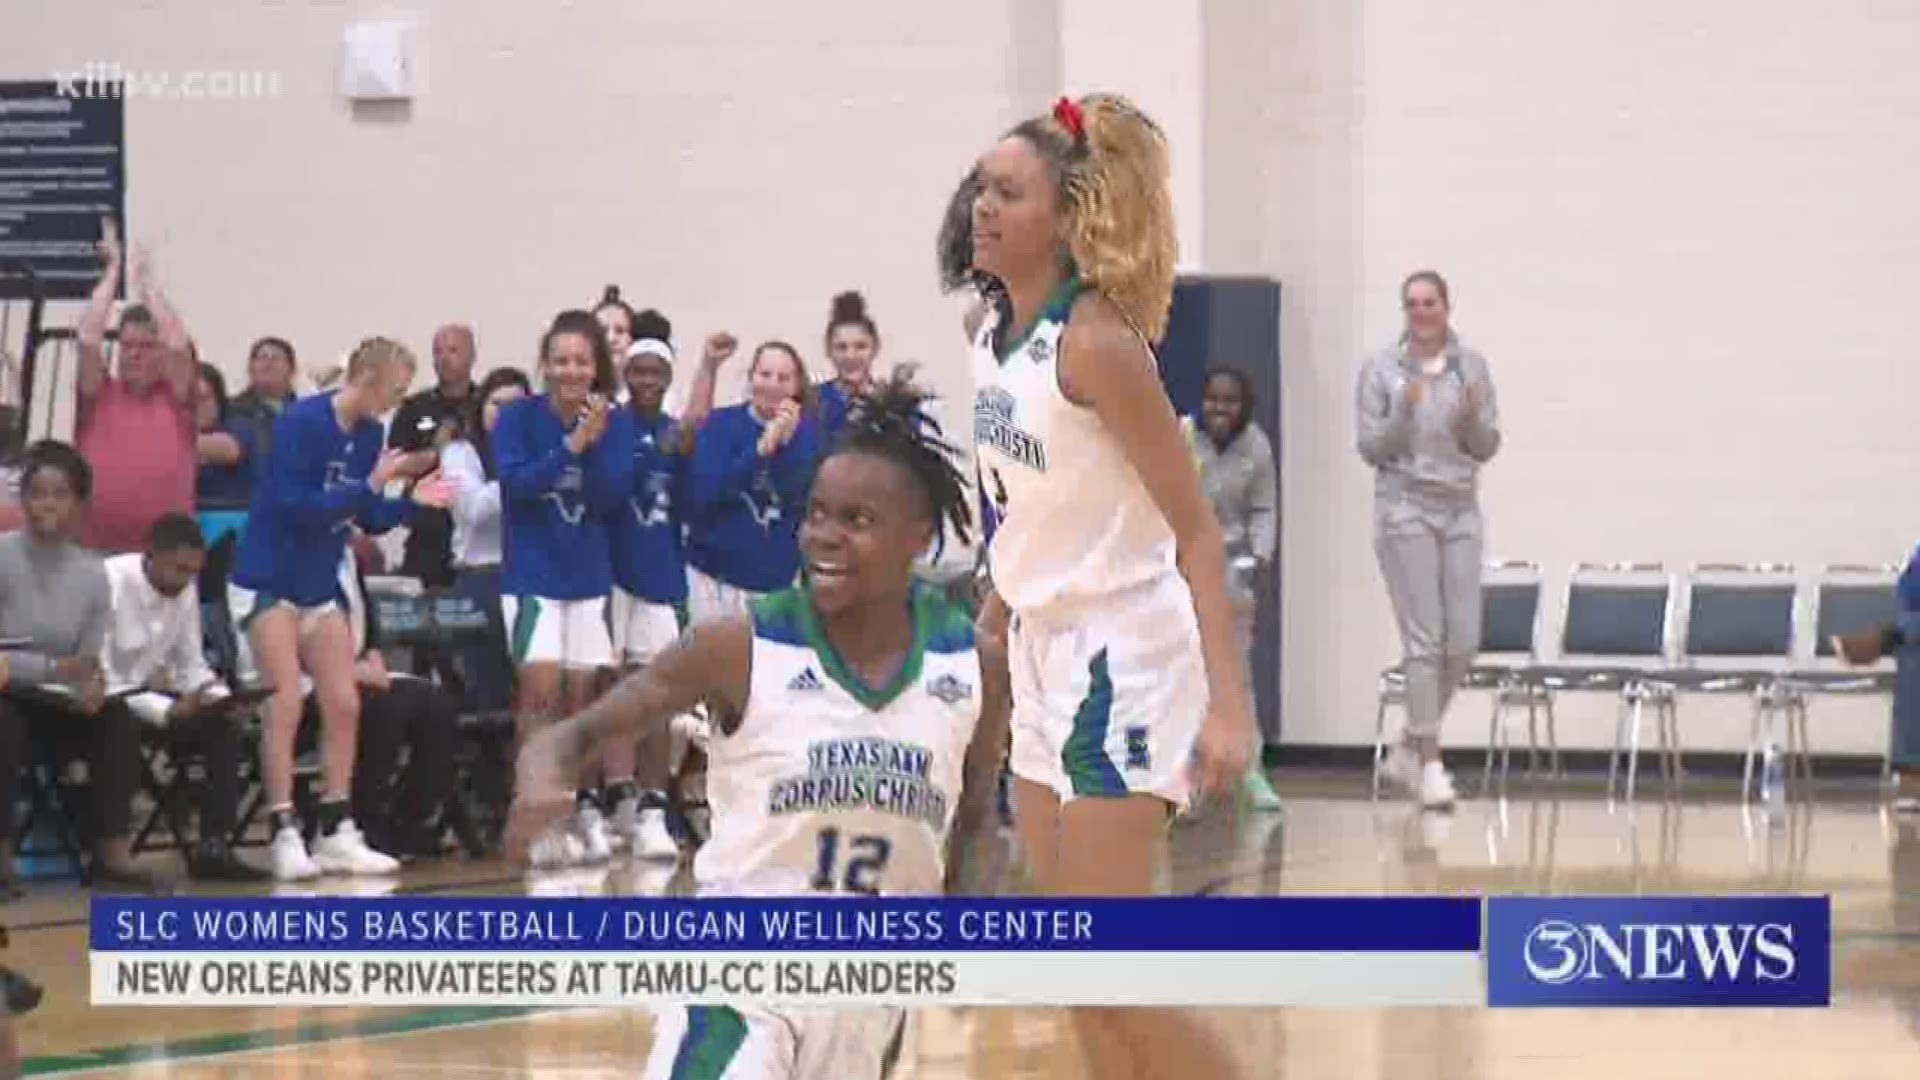 The Islanders scored just six points in the first quarter, but overcame the slow start to beat New Orleans 43-40.